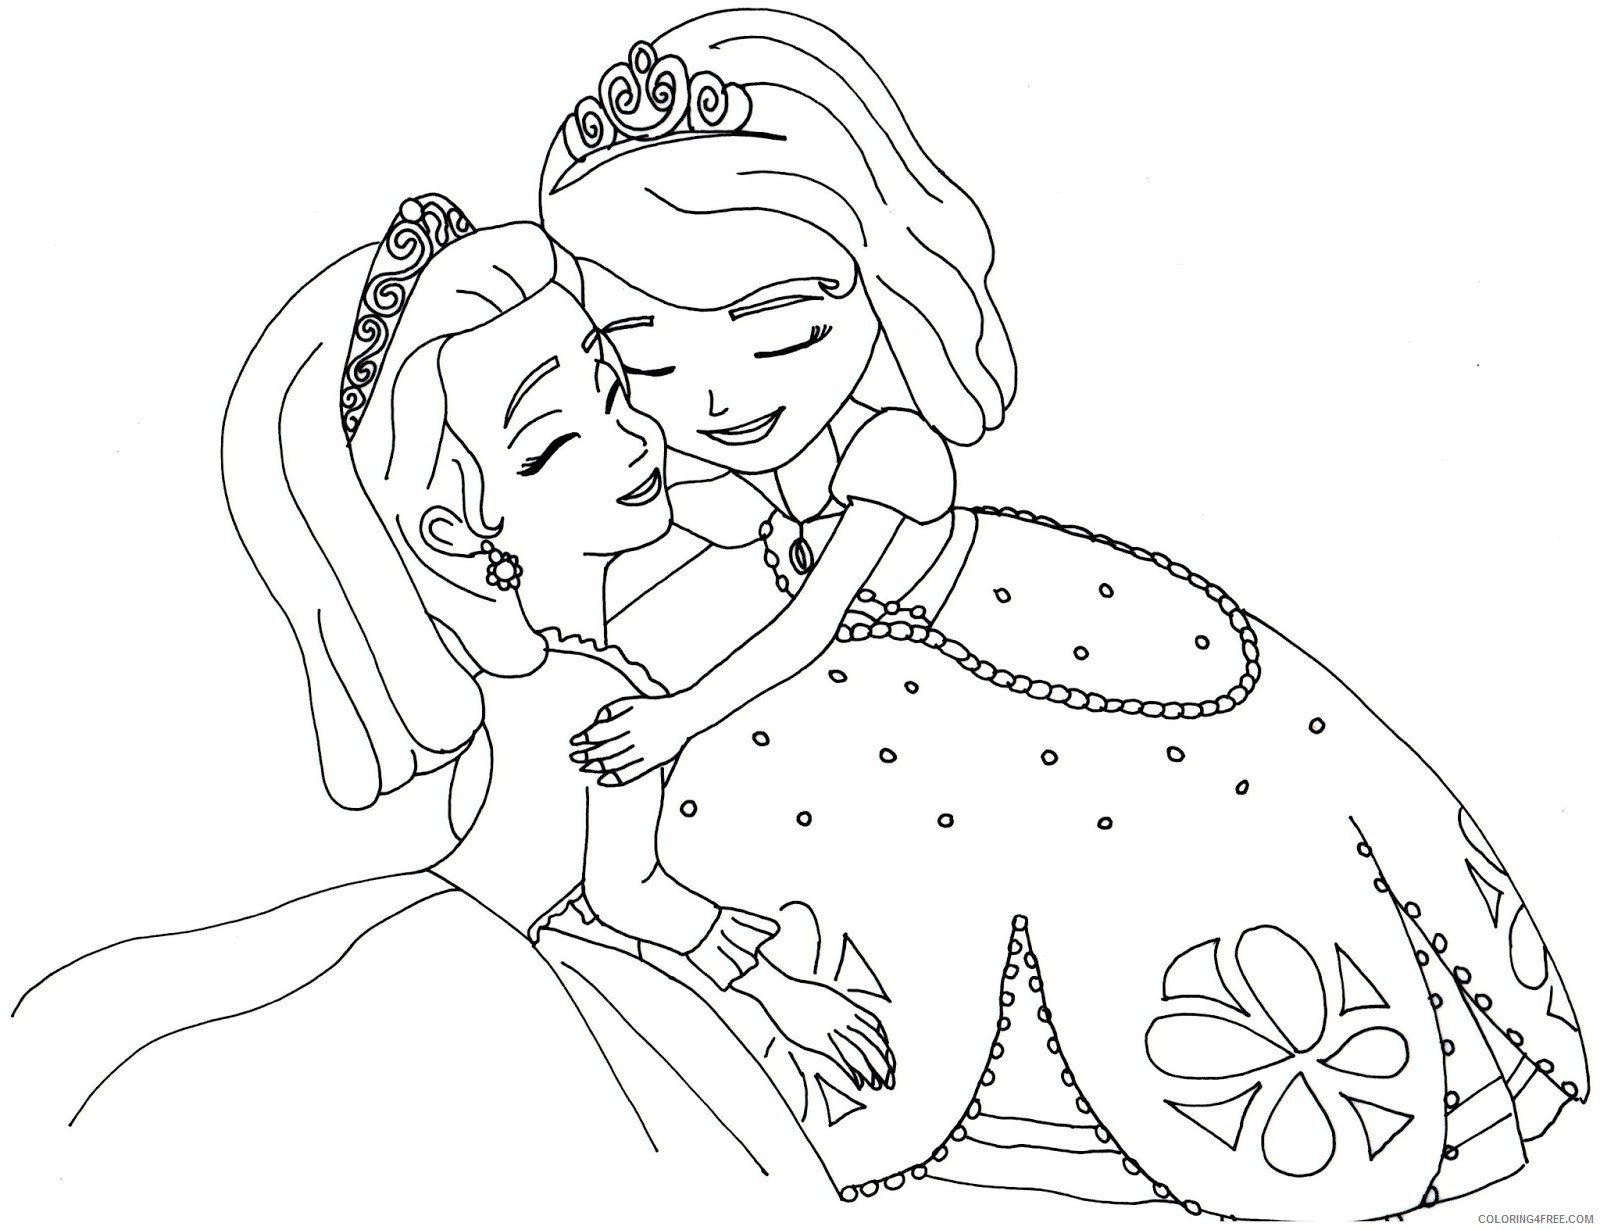 Sofia the First Coloring Pages Cartoons Color Sofia the First Pictures Printable 2020 5831 Coloring4free